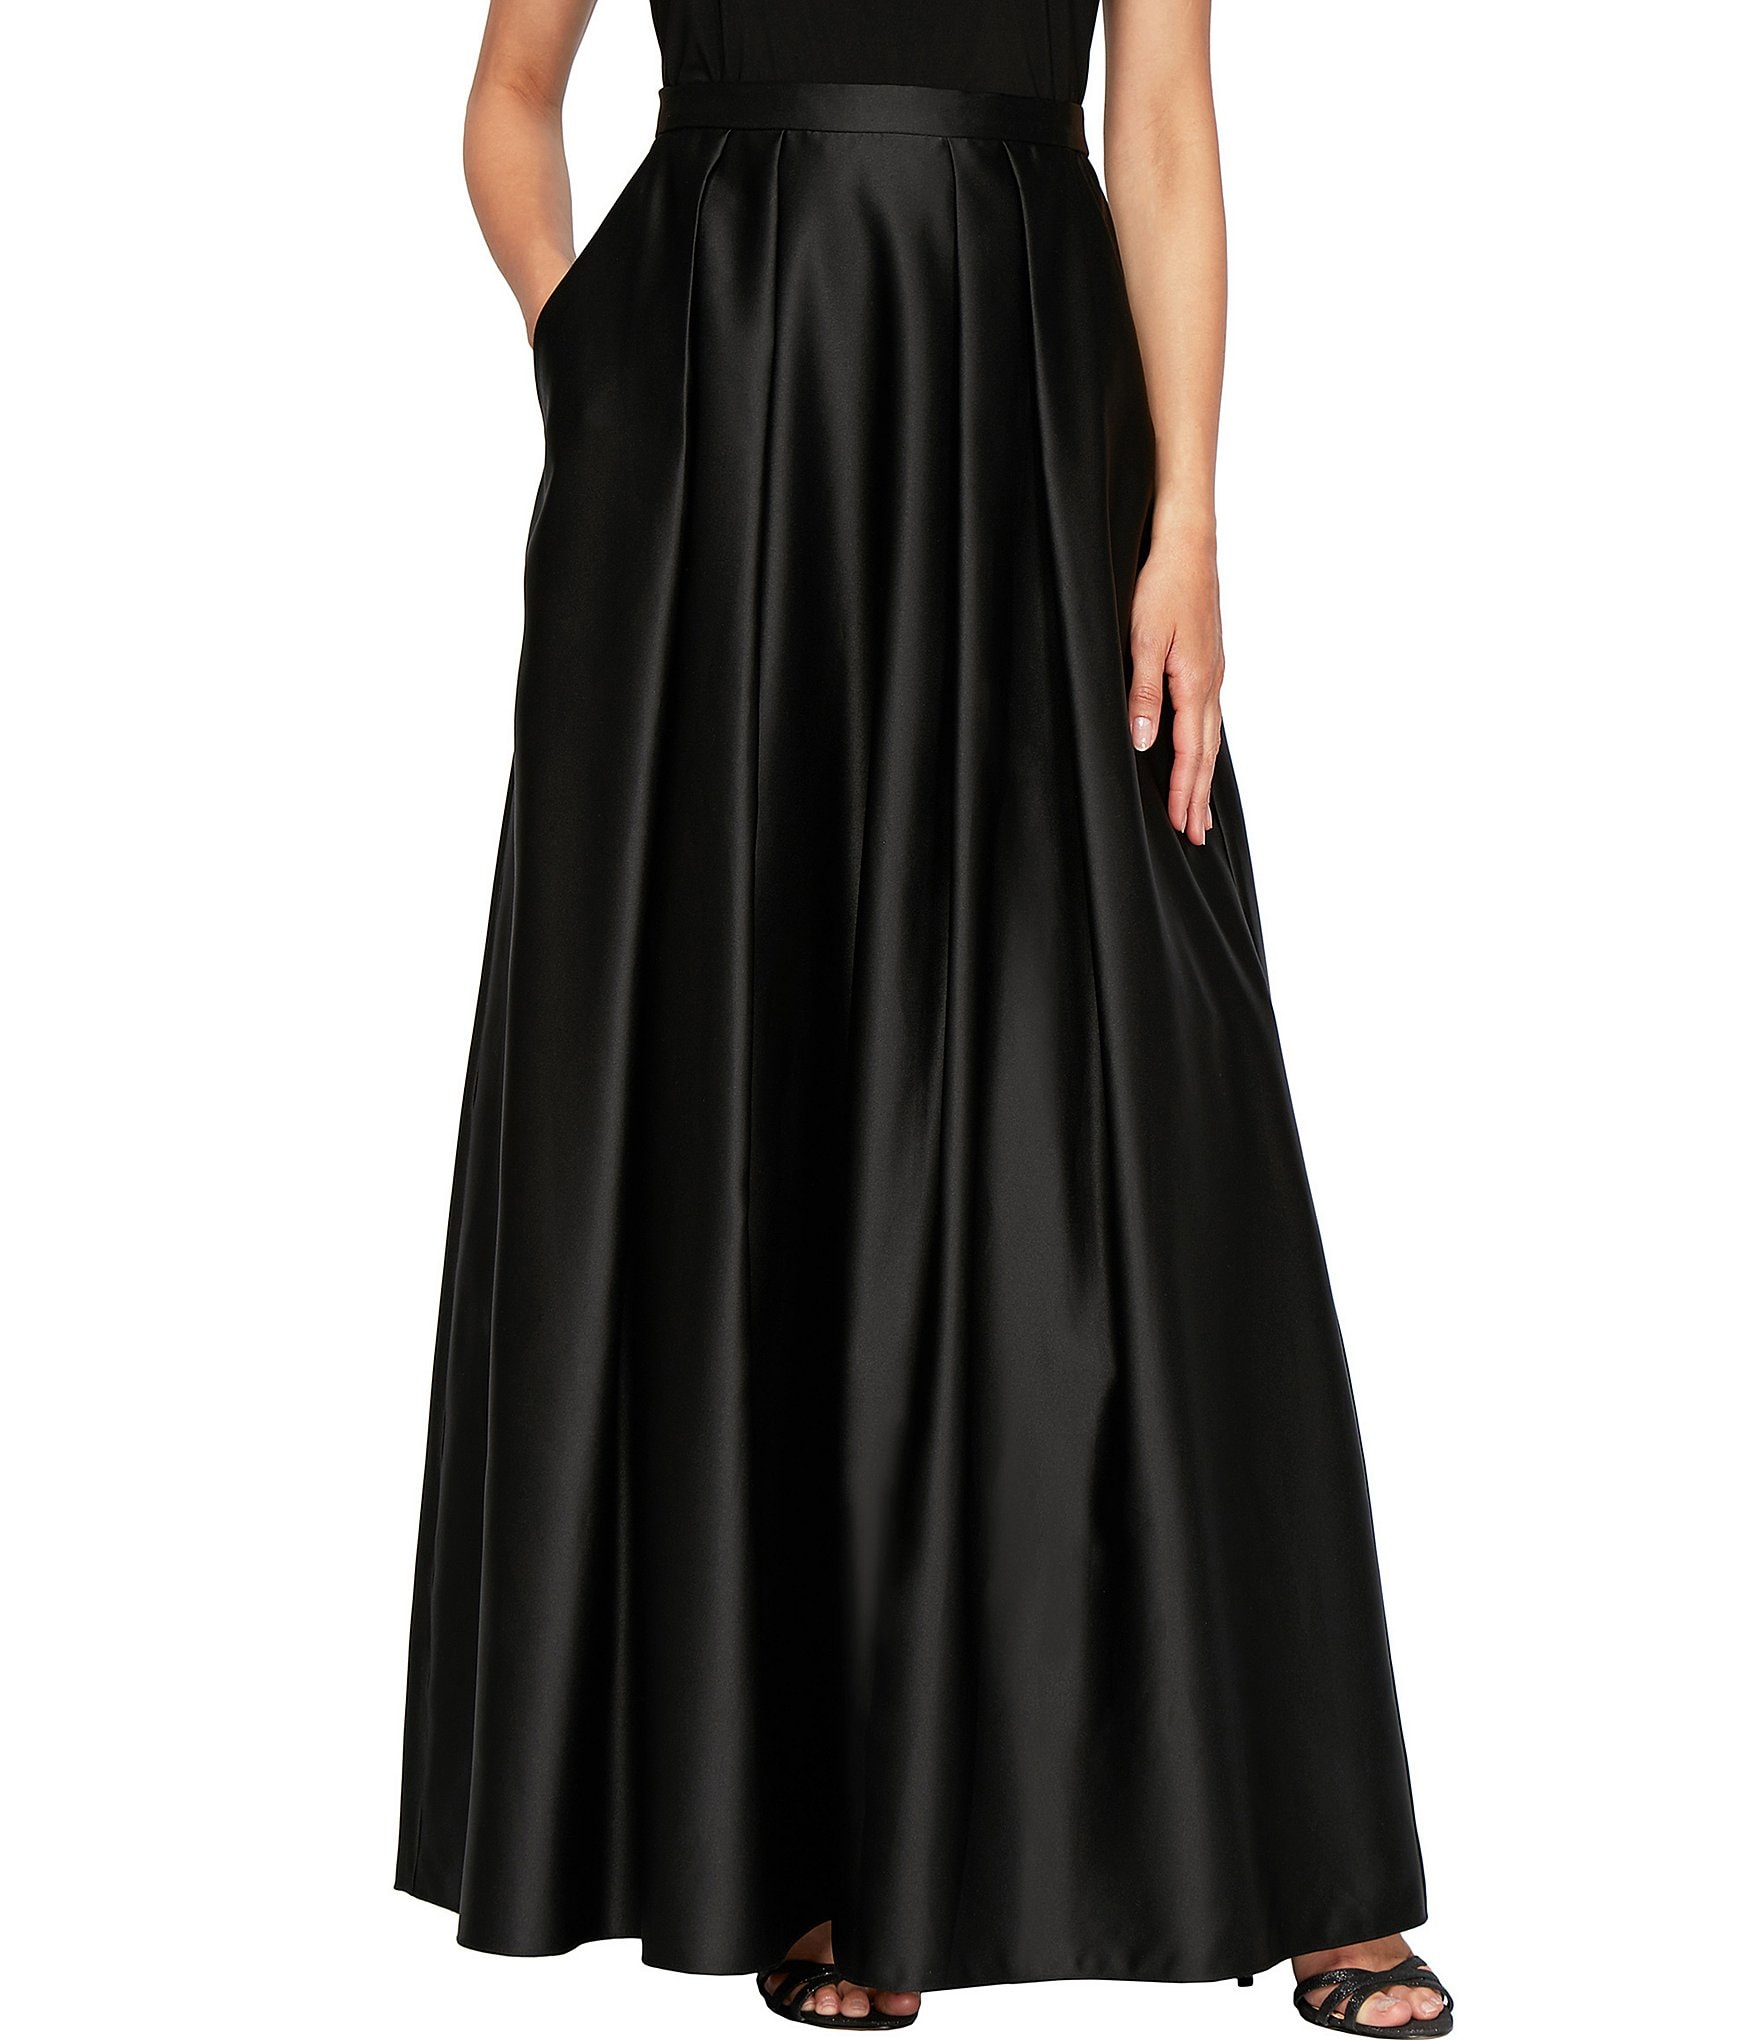 Satin Inverted Pleat Ball Gown Skirt ...